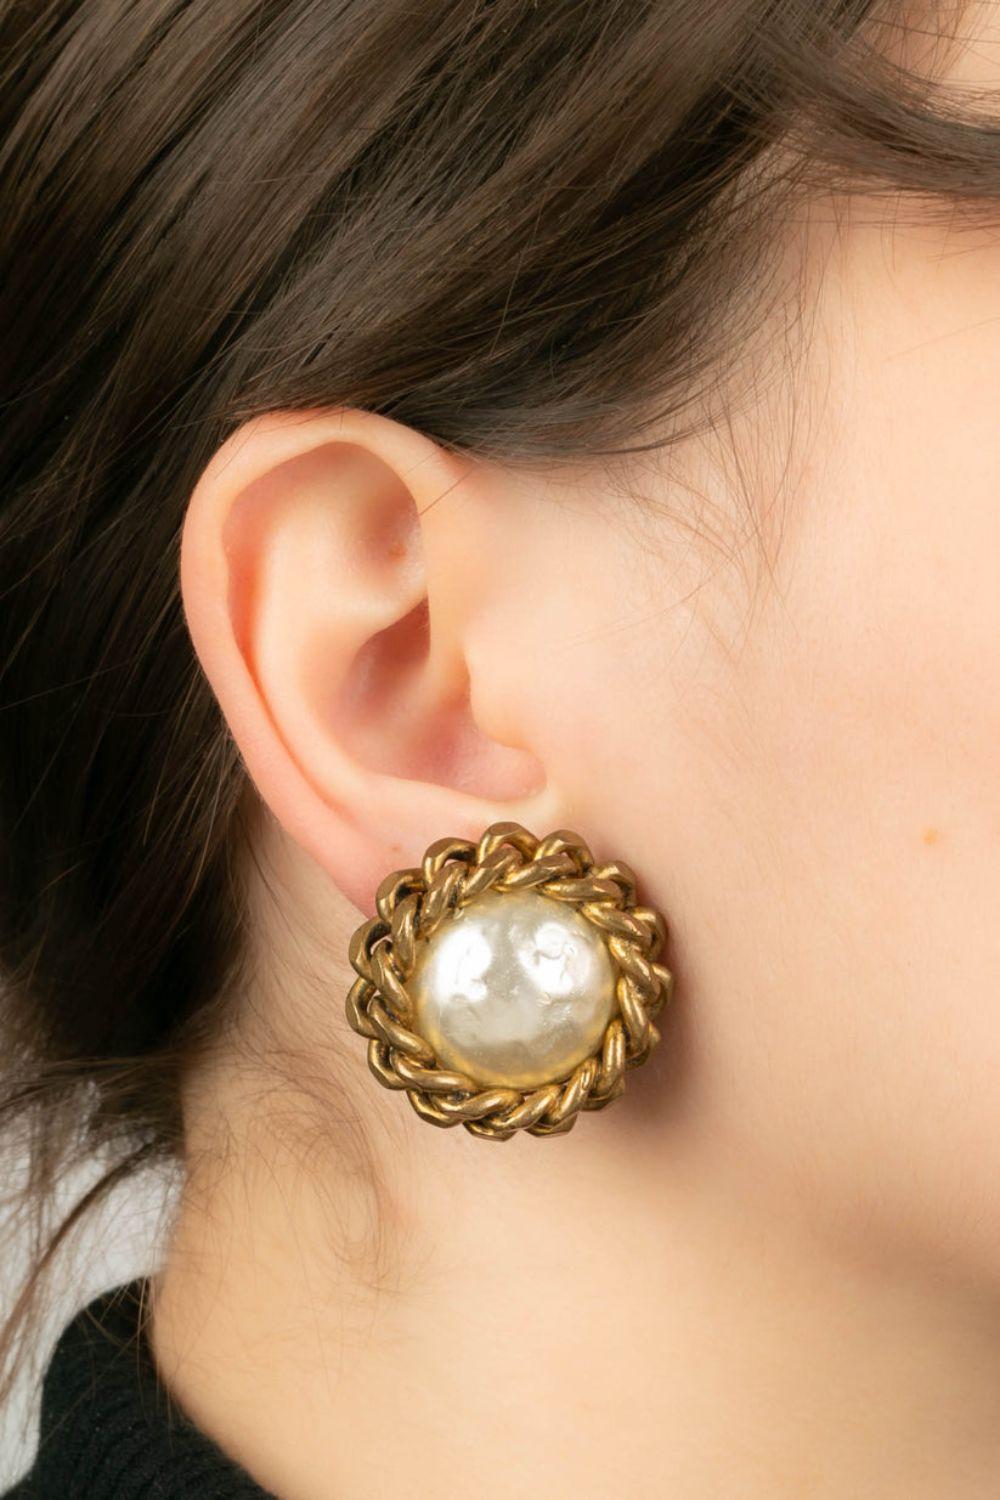 Chanel - Gold-plated metal clip earrings with pearly cabochon.

Additional information:
Dimensions: Ø 3 cm
Condition: Very good condition
Seller Ref number: BOB229